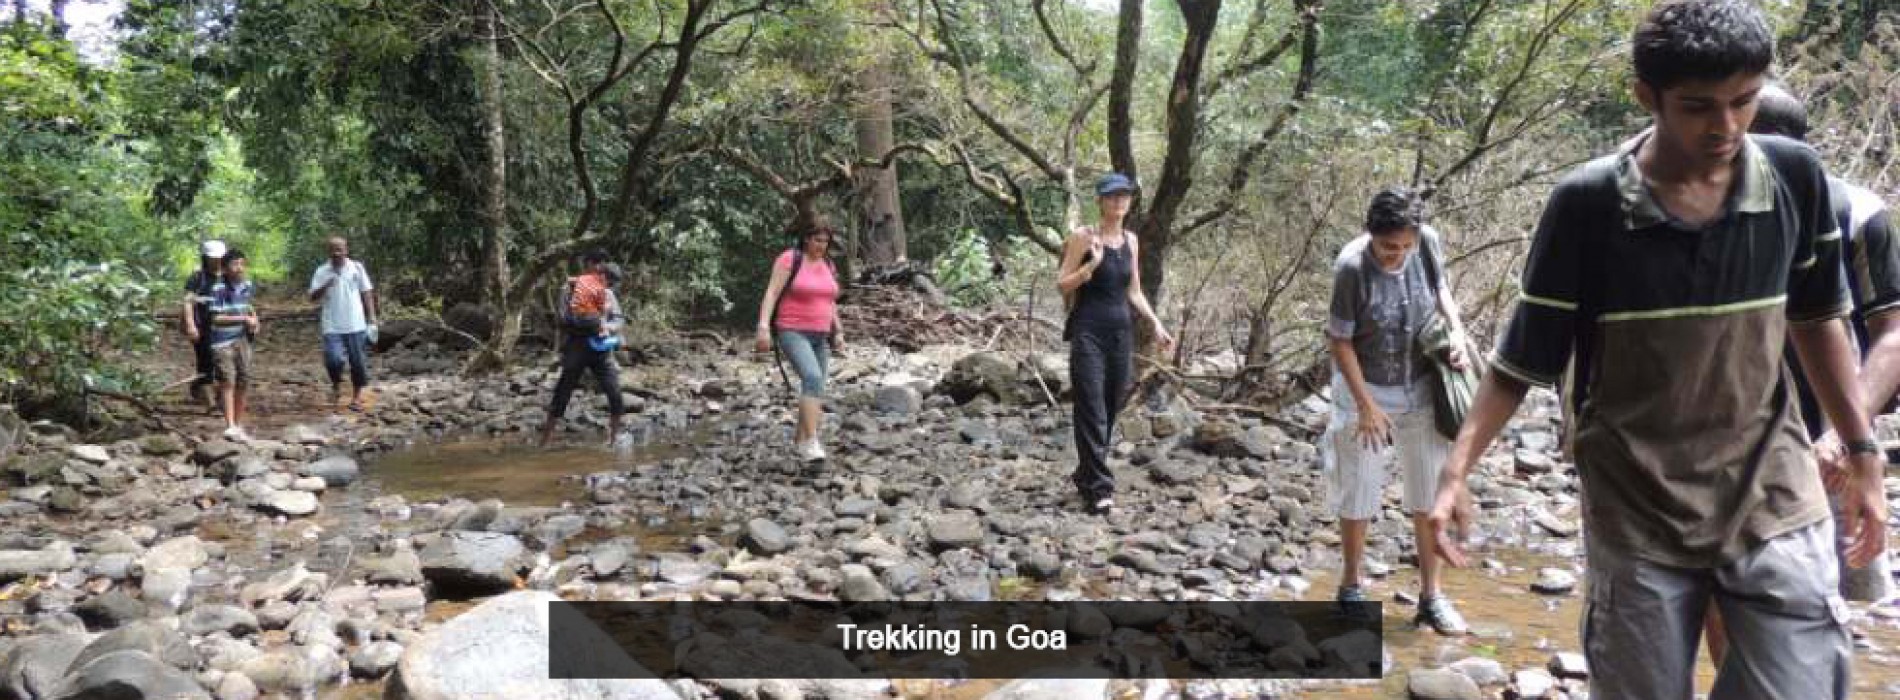 Eight exquisite things to do in Goa in the eighth month of the year 2017